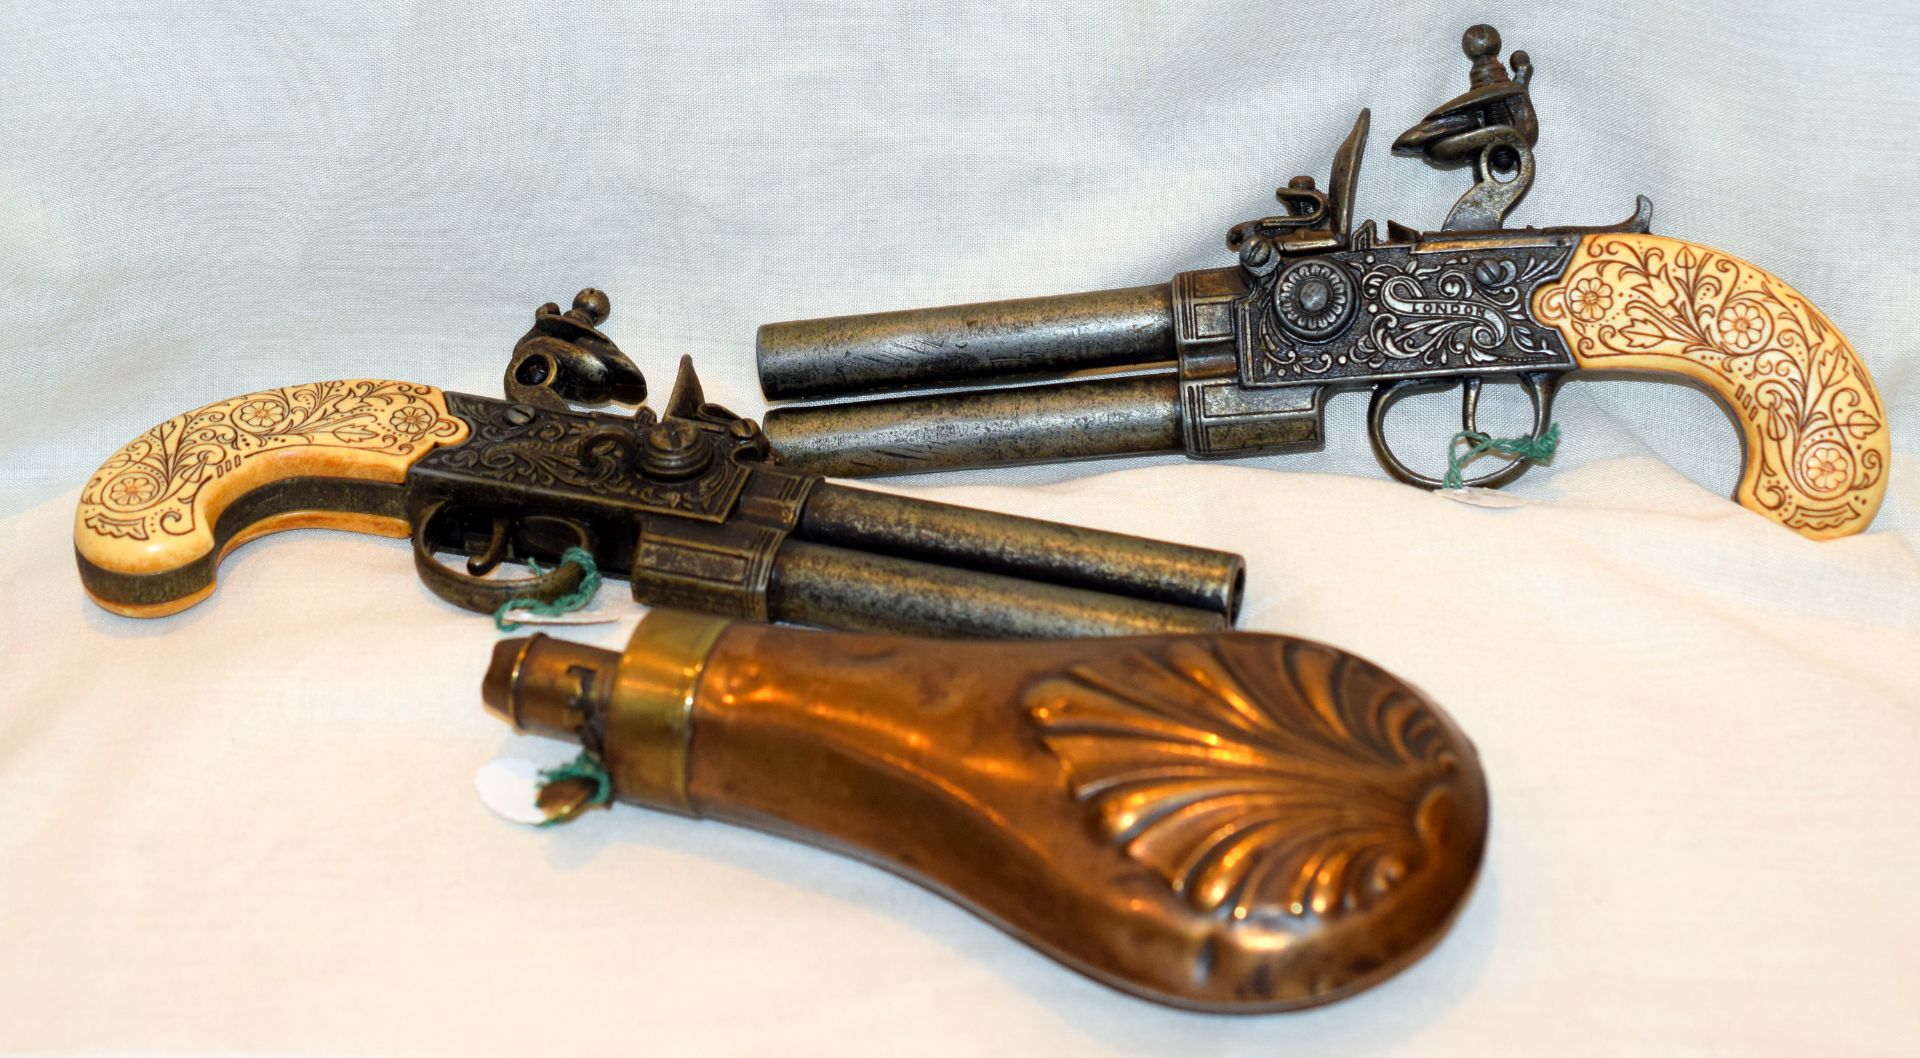 Pair Of Over And Under Duelling Pistols Replicas And 19th Century Powder Flask